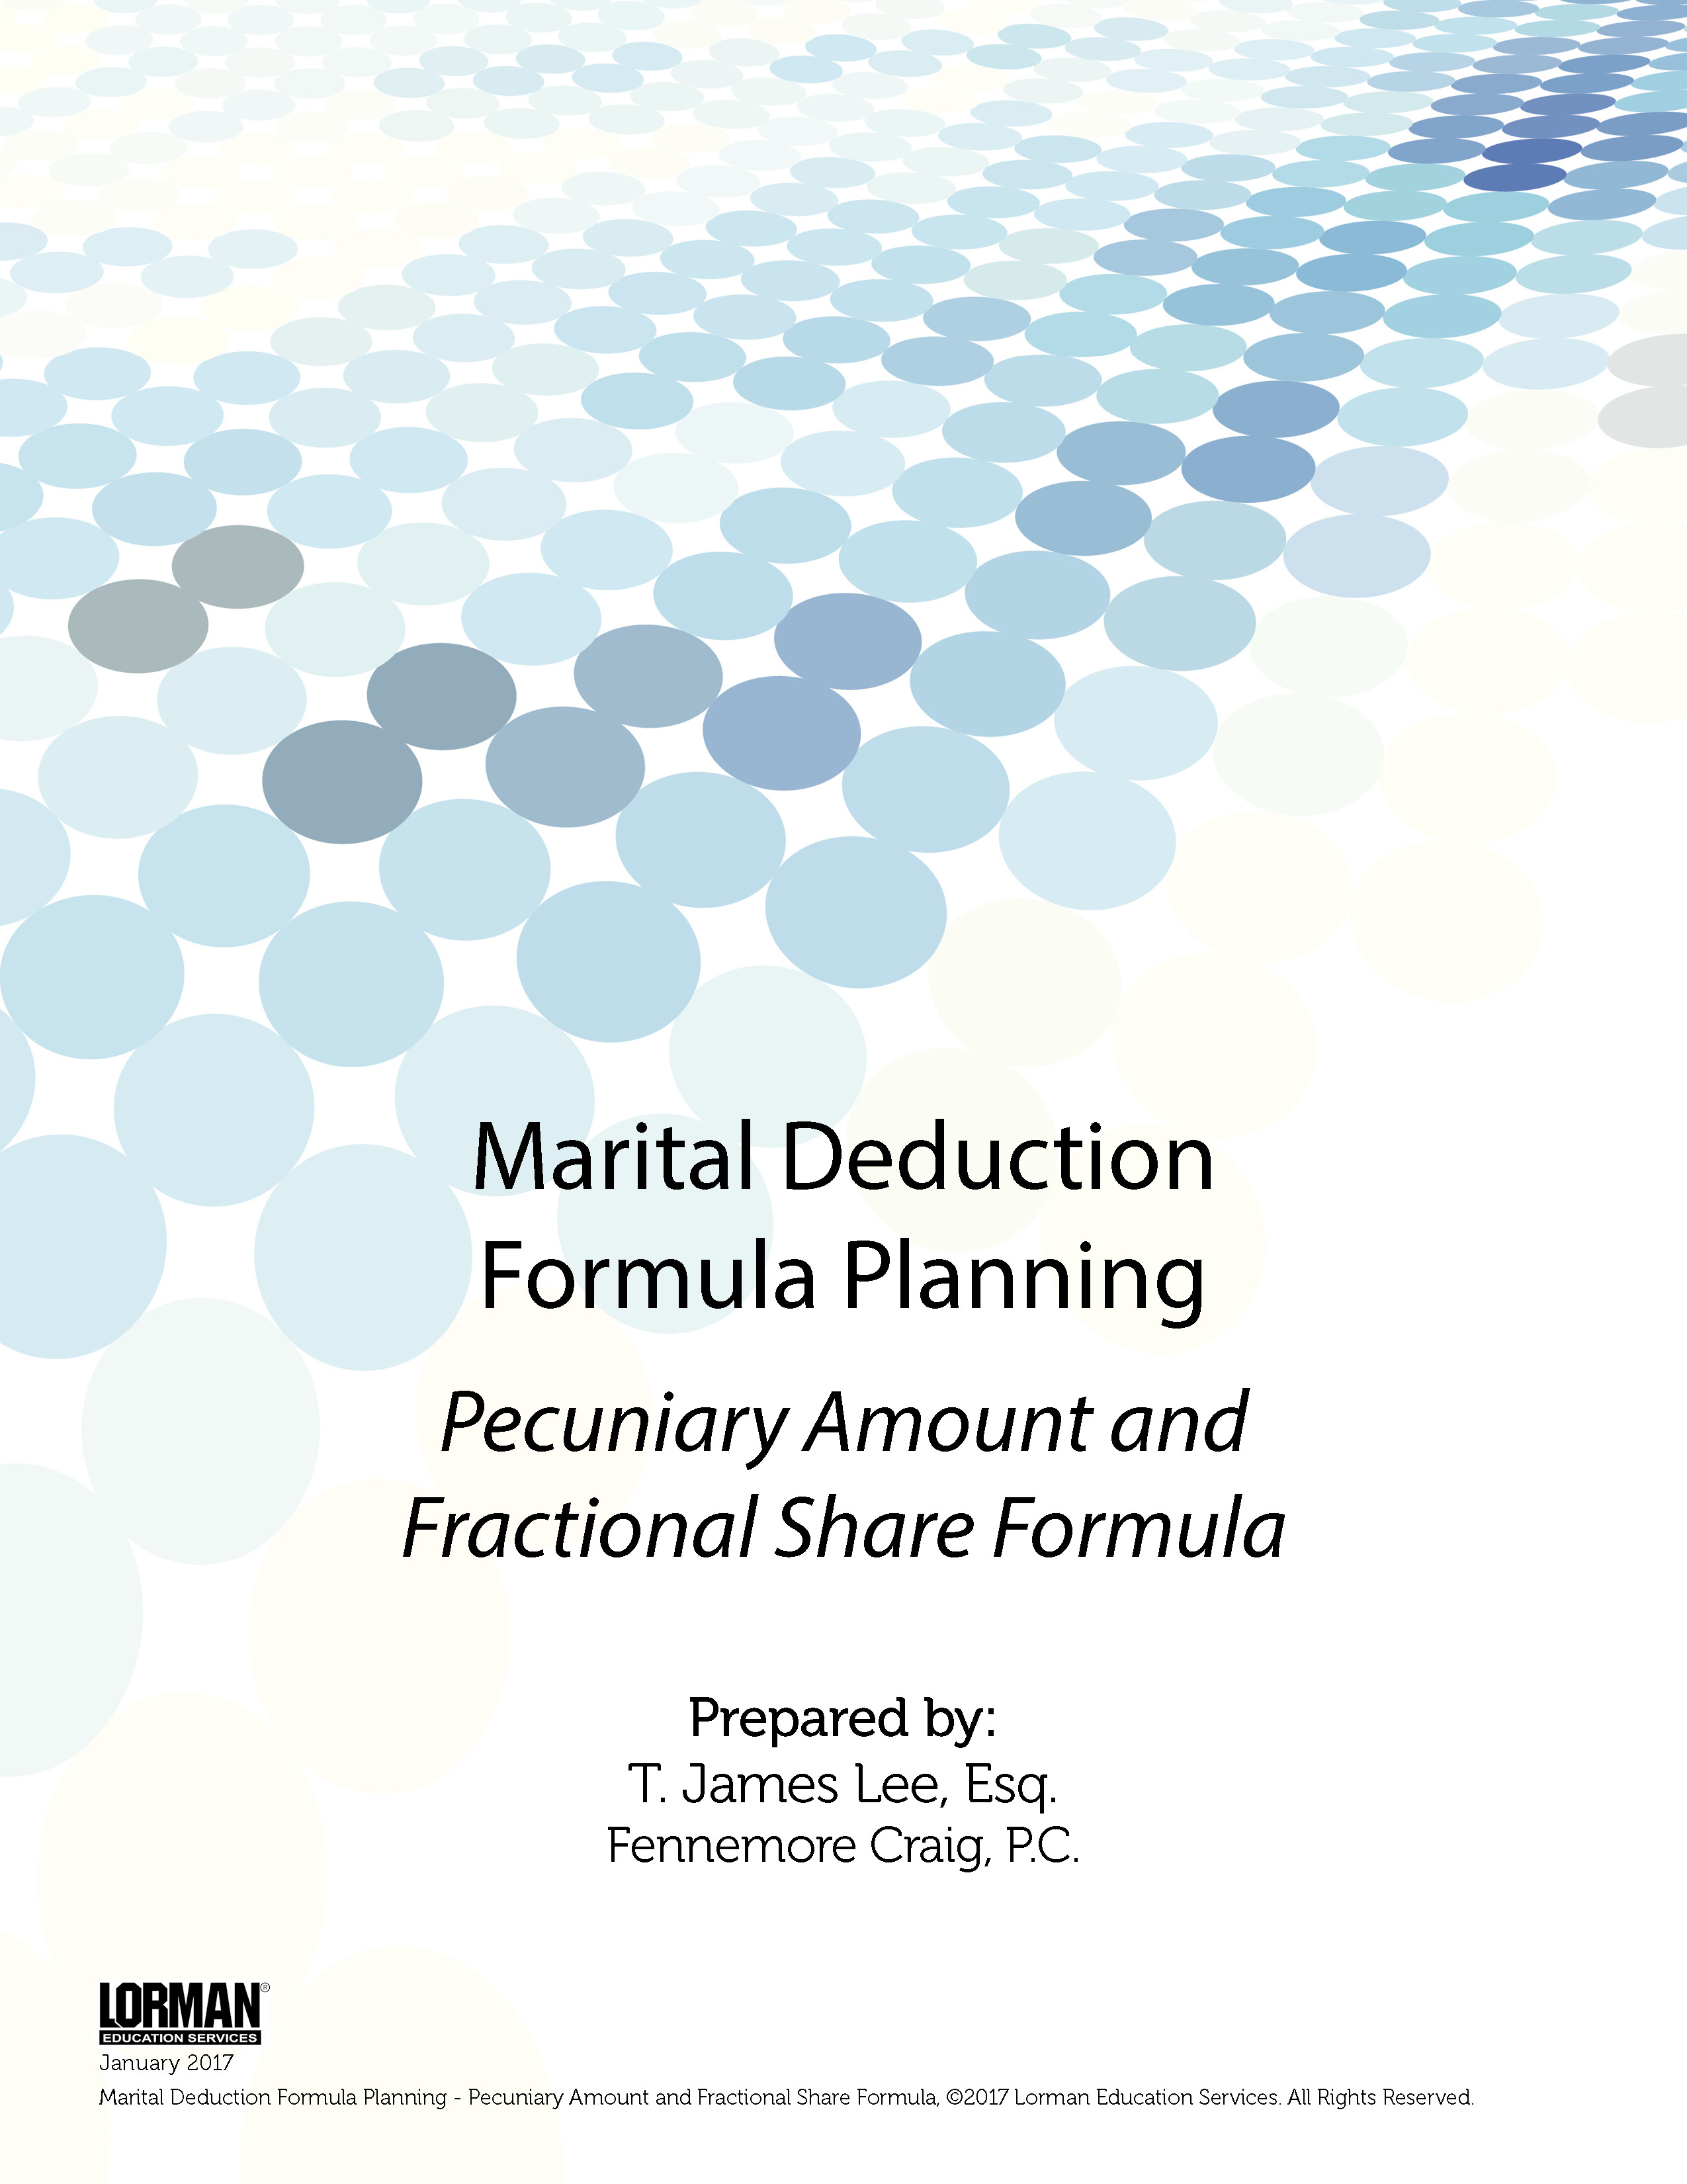 Marital Deduction Formula Planning - Pecuniary Amount and Fractional Share Formula